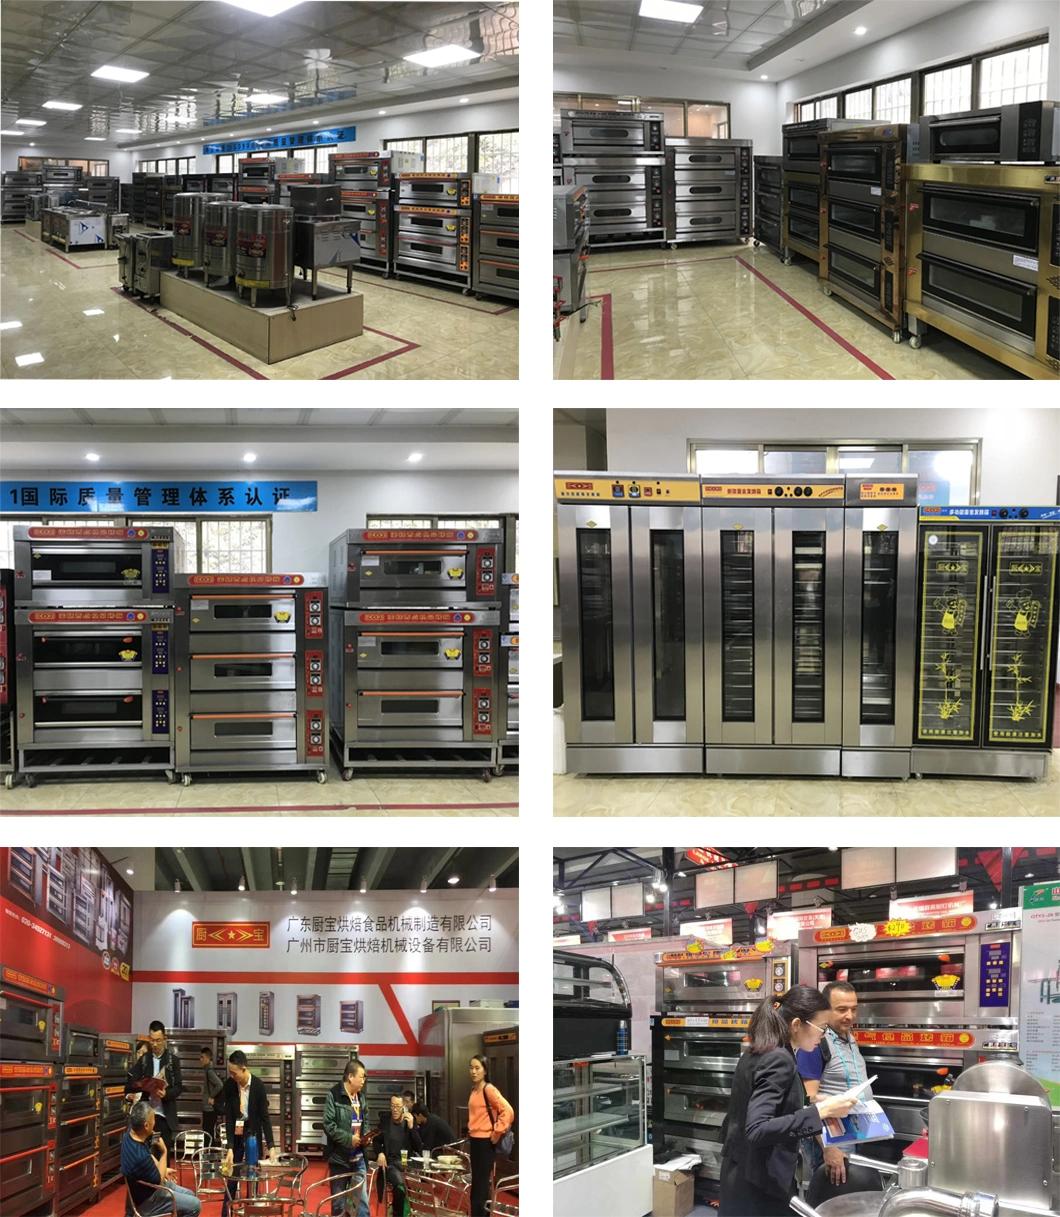 Commercial Kitchen 4 Deck 16 Trays Electric Oven for Baking Equipment Bakery Machinery Food Machine